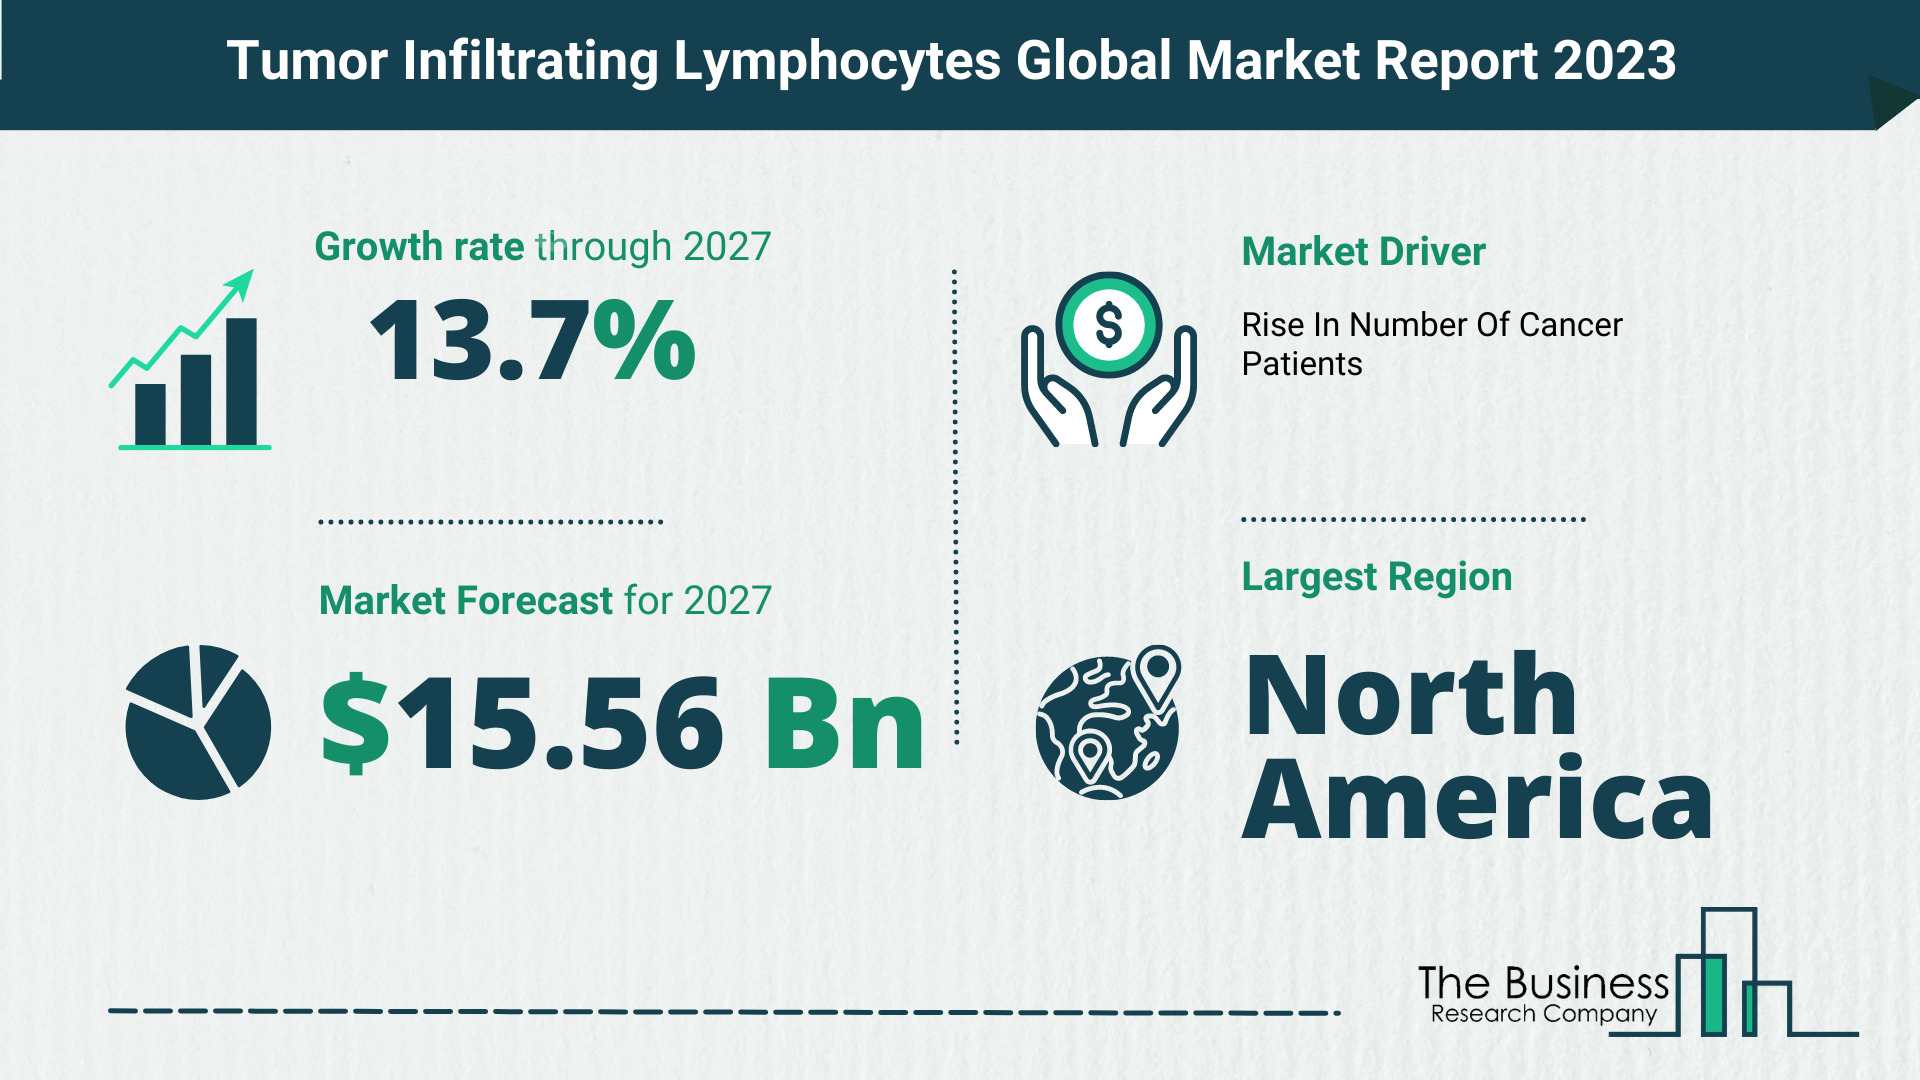 Global Tumor Infiltrating Lymphocytes Market Opportunities And Strategies 2023